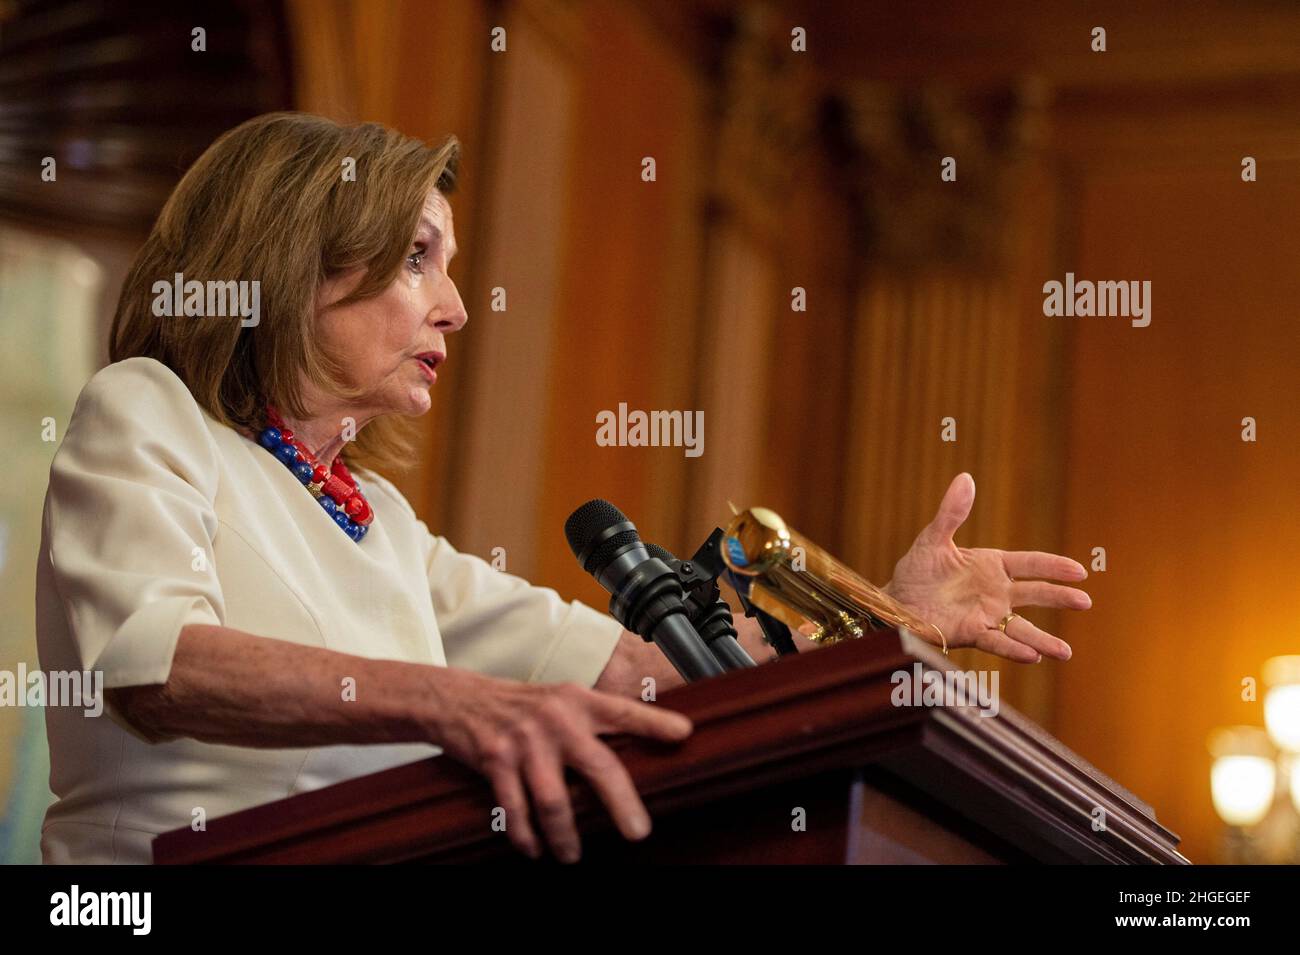 Speaker of the House Nancy Pelosi, D-CA, discusses President Biden’s first year in office during her weekly press conference at the US Capitol in Washington, DC on Thursday, January 20, 2022. Photo by Bonnie Cash/Pool/ABACAPRESS.COM Stock Photo